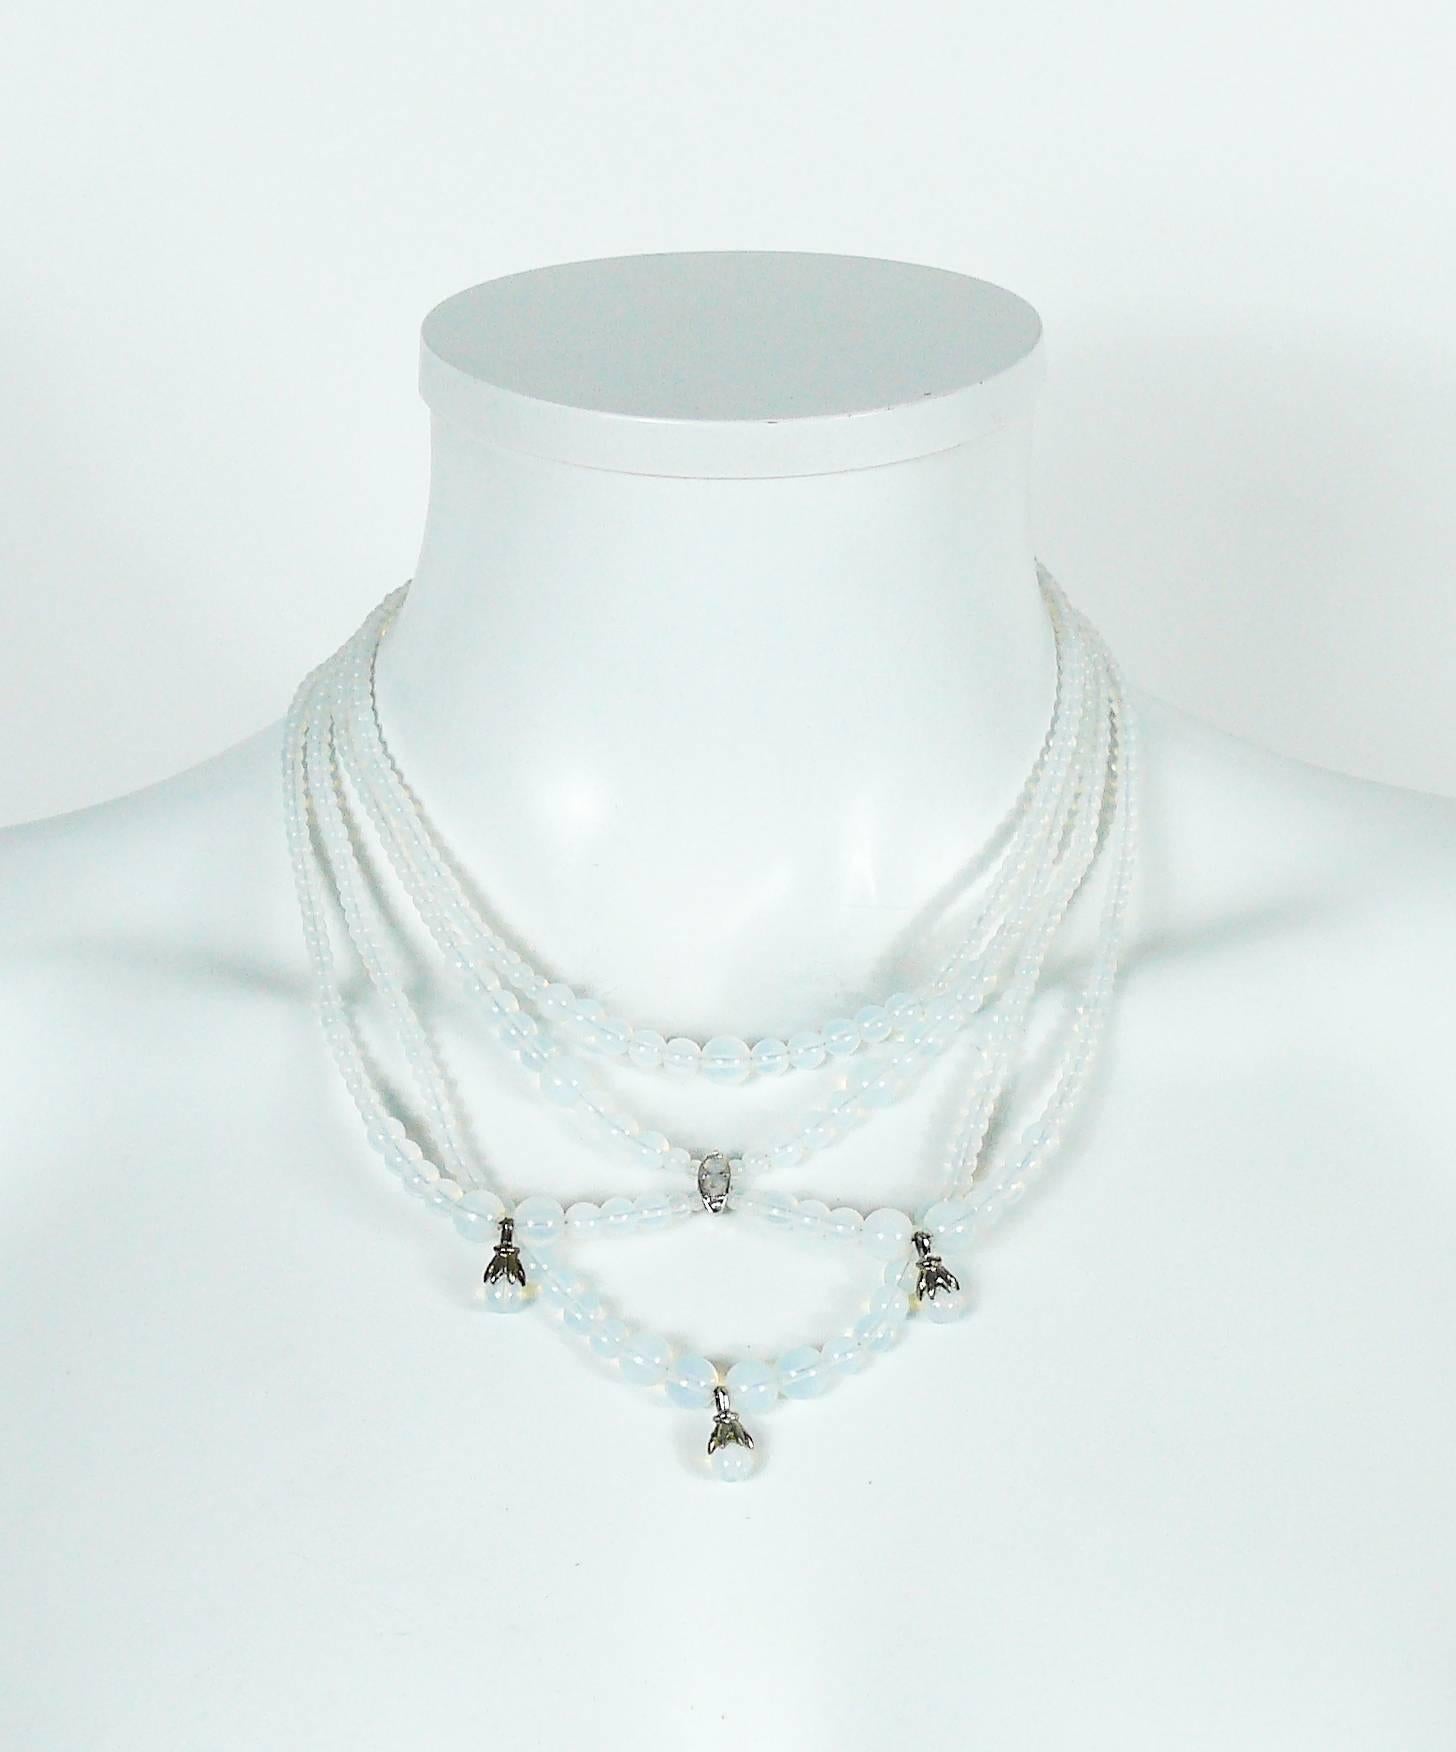 CHRISTIAN DIOR multi strand drapery necklace featuring opalescent glass beads simulating moon stones in a silver tone setting.

Created in the ateliers of french parurier ROBERT GOOSSENS.

Marked CHRISTIAN DIOR Boutique.

Indicative measurements :